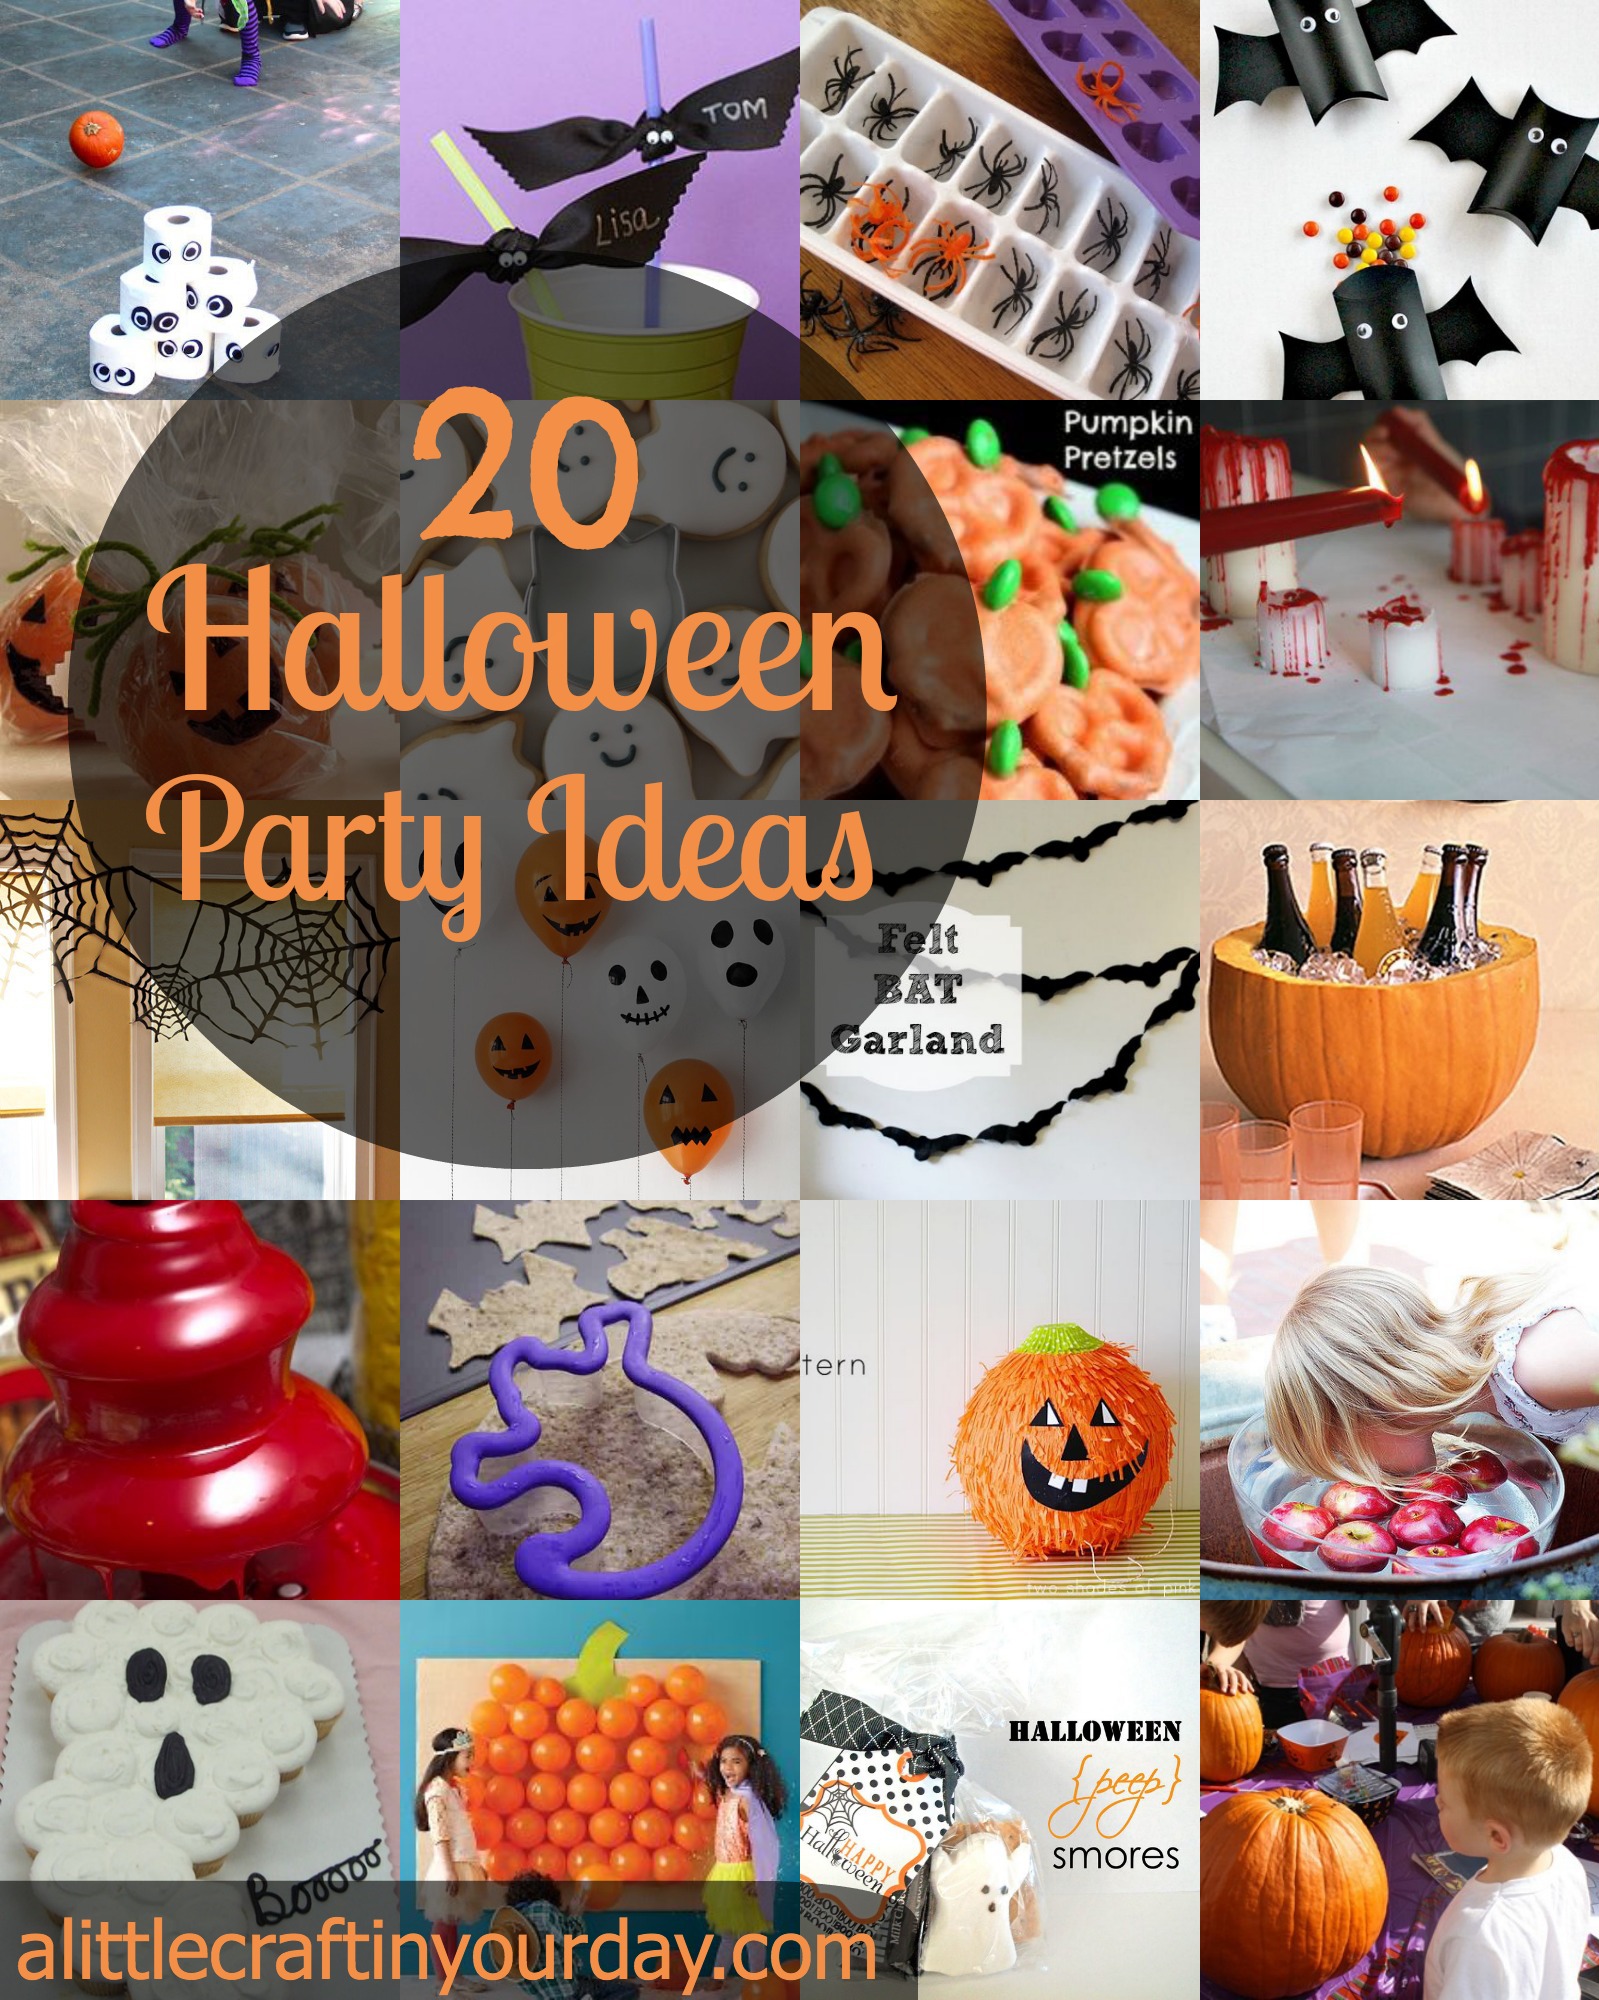 21 Halloween Party Ideas - A Little Craft In Your Day